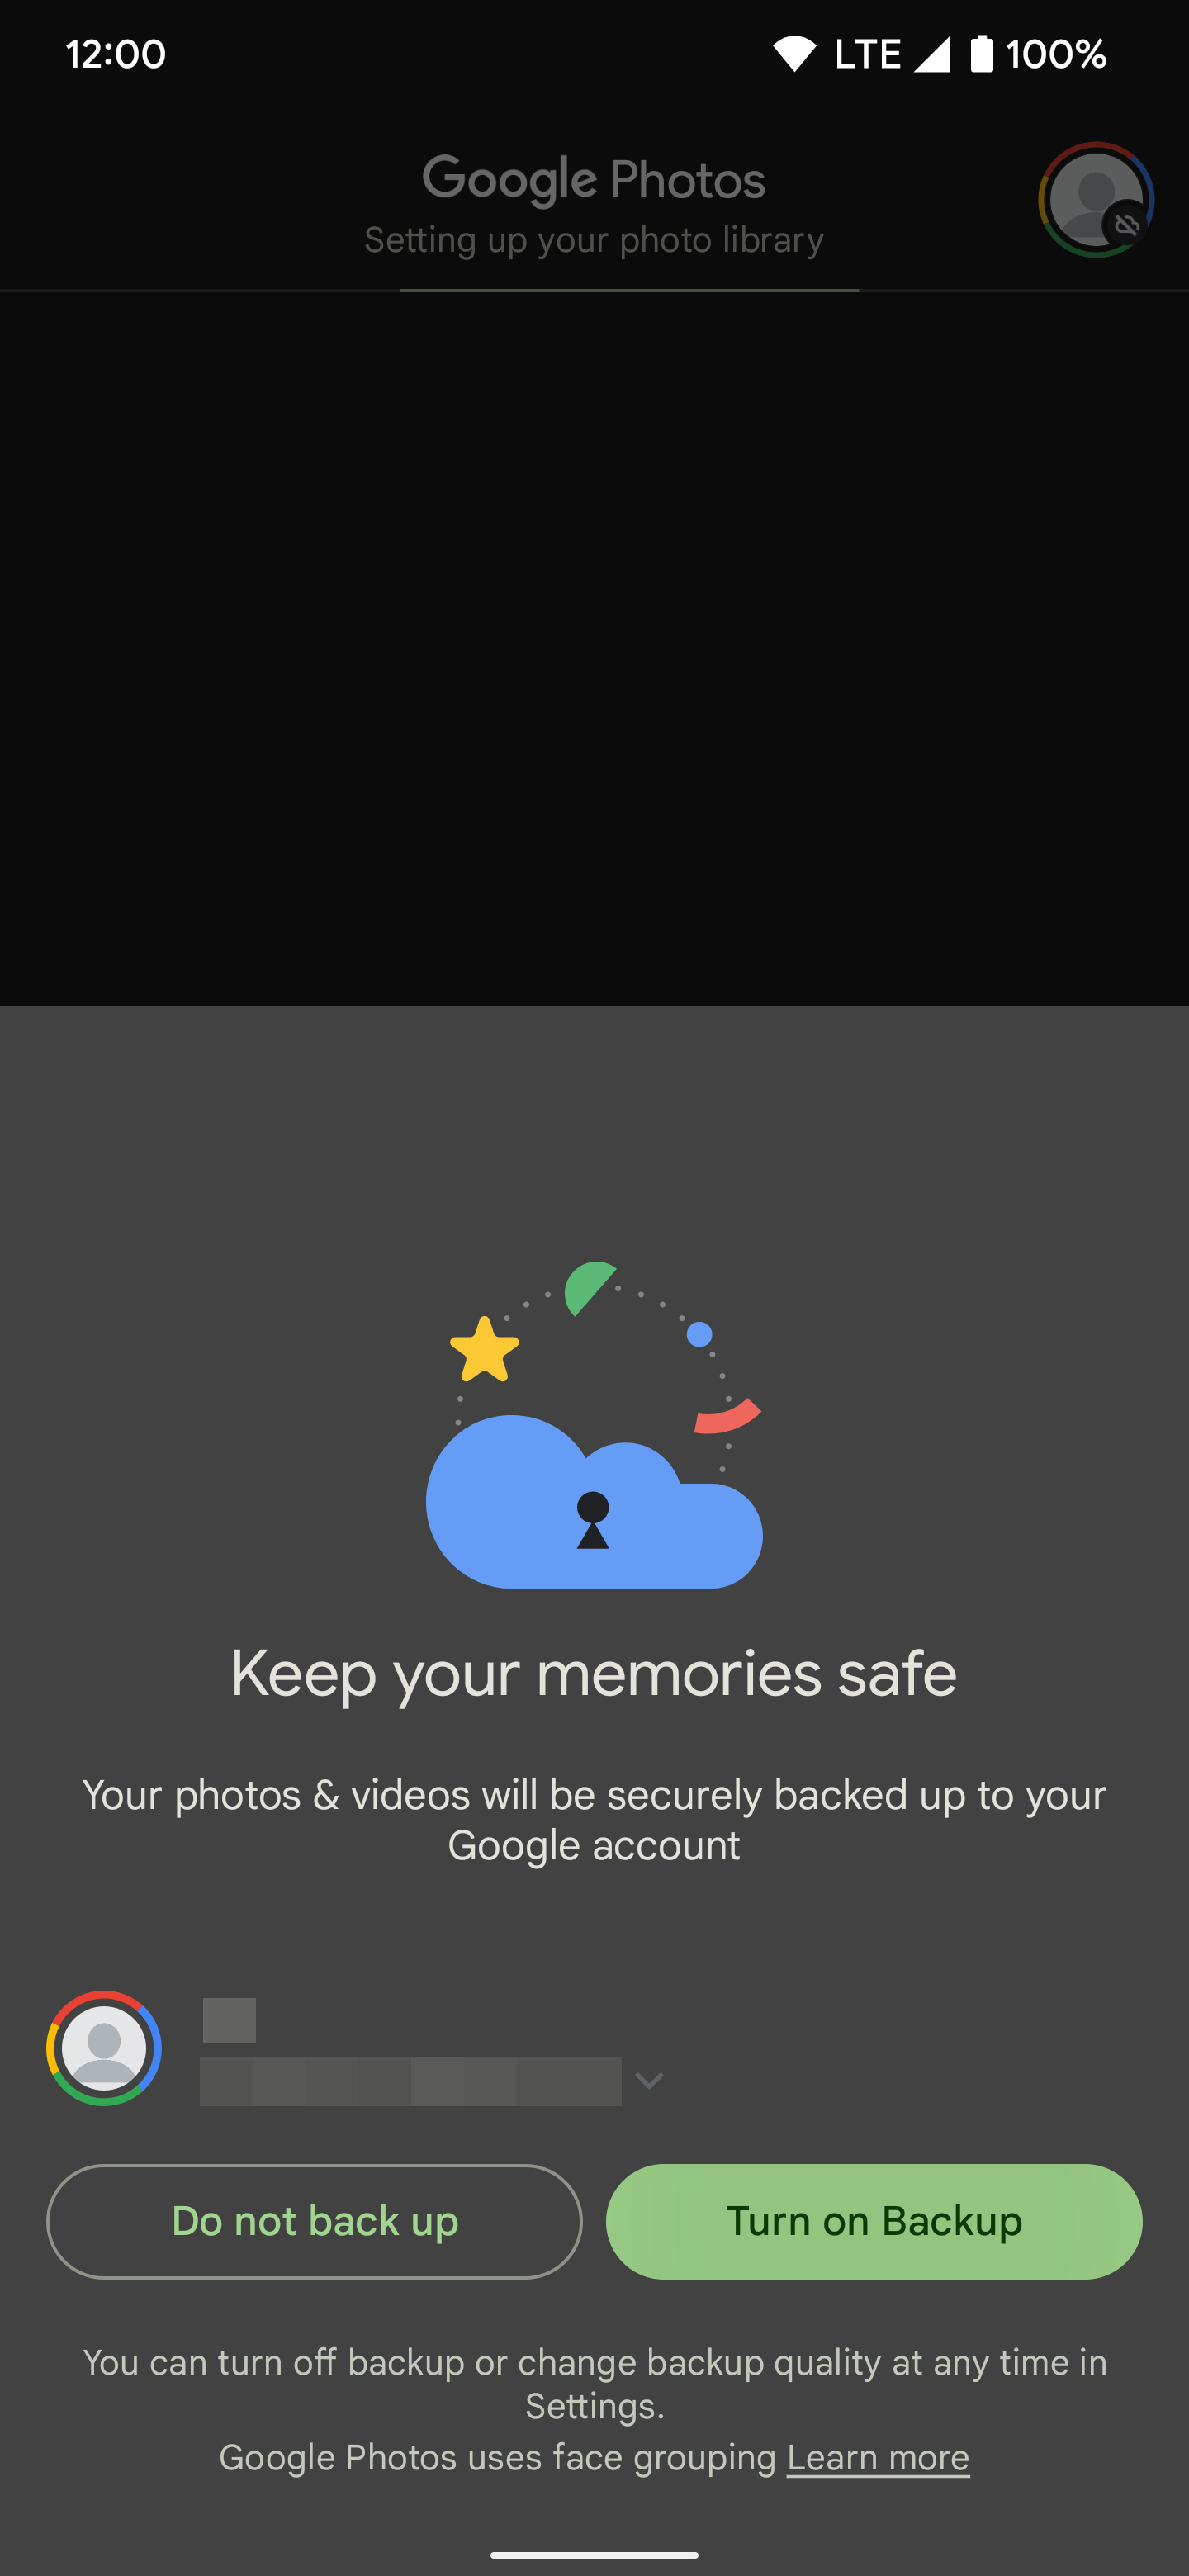 Turning on the online backup option in the Google Photos app